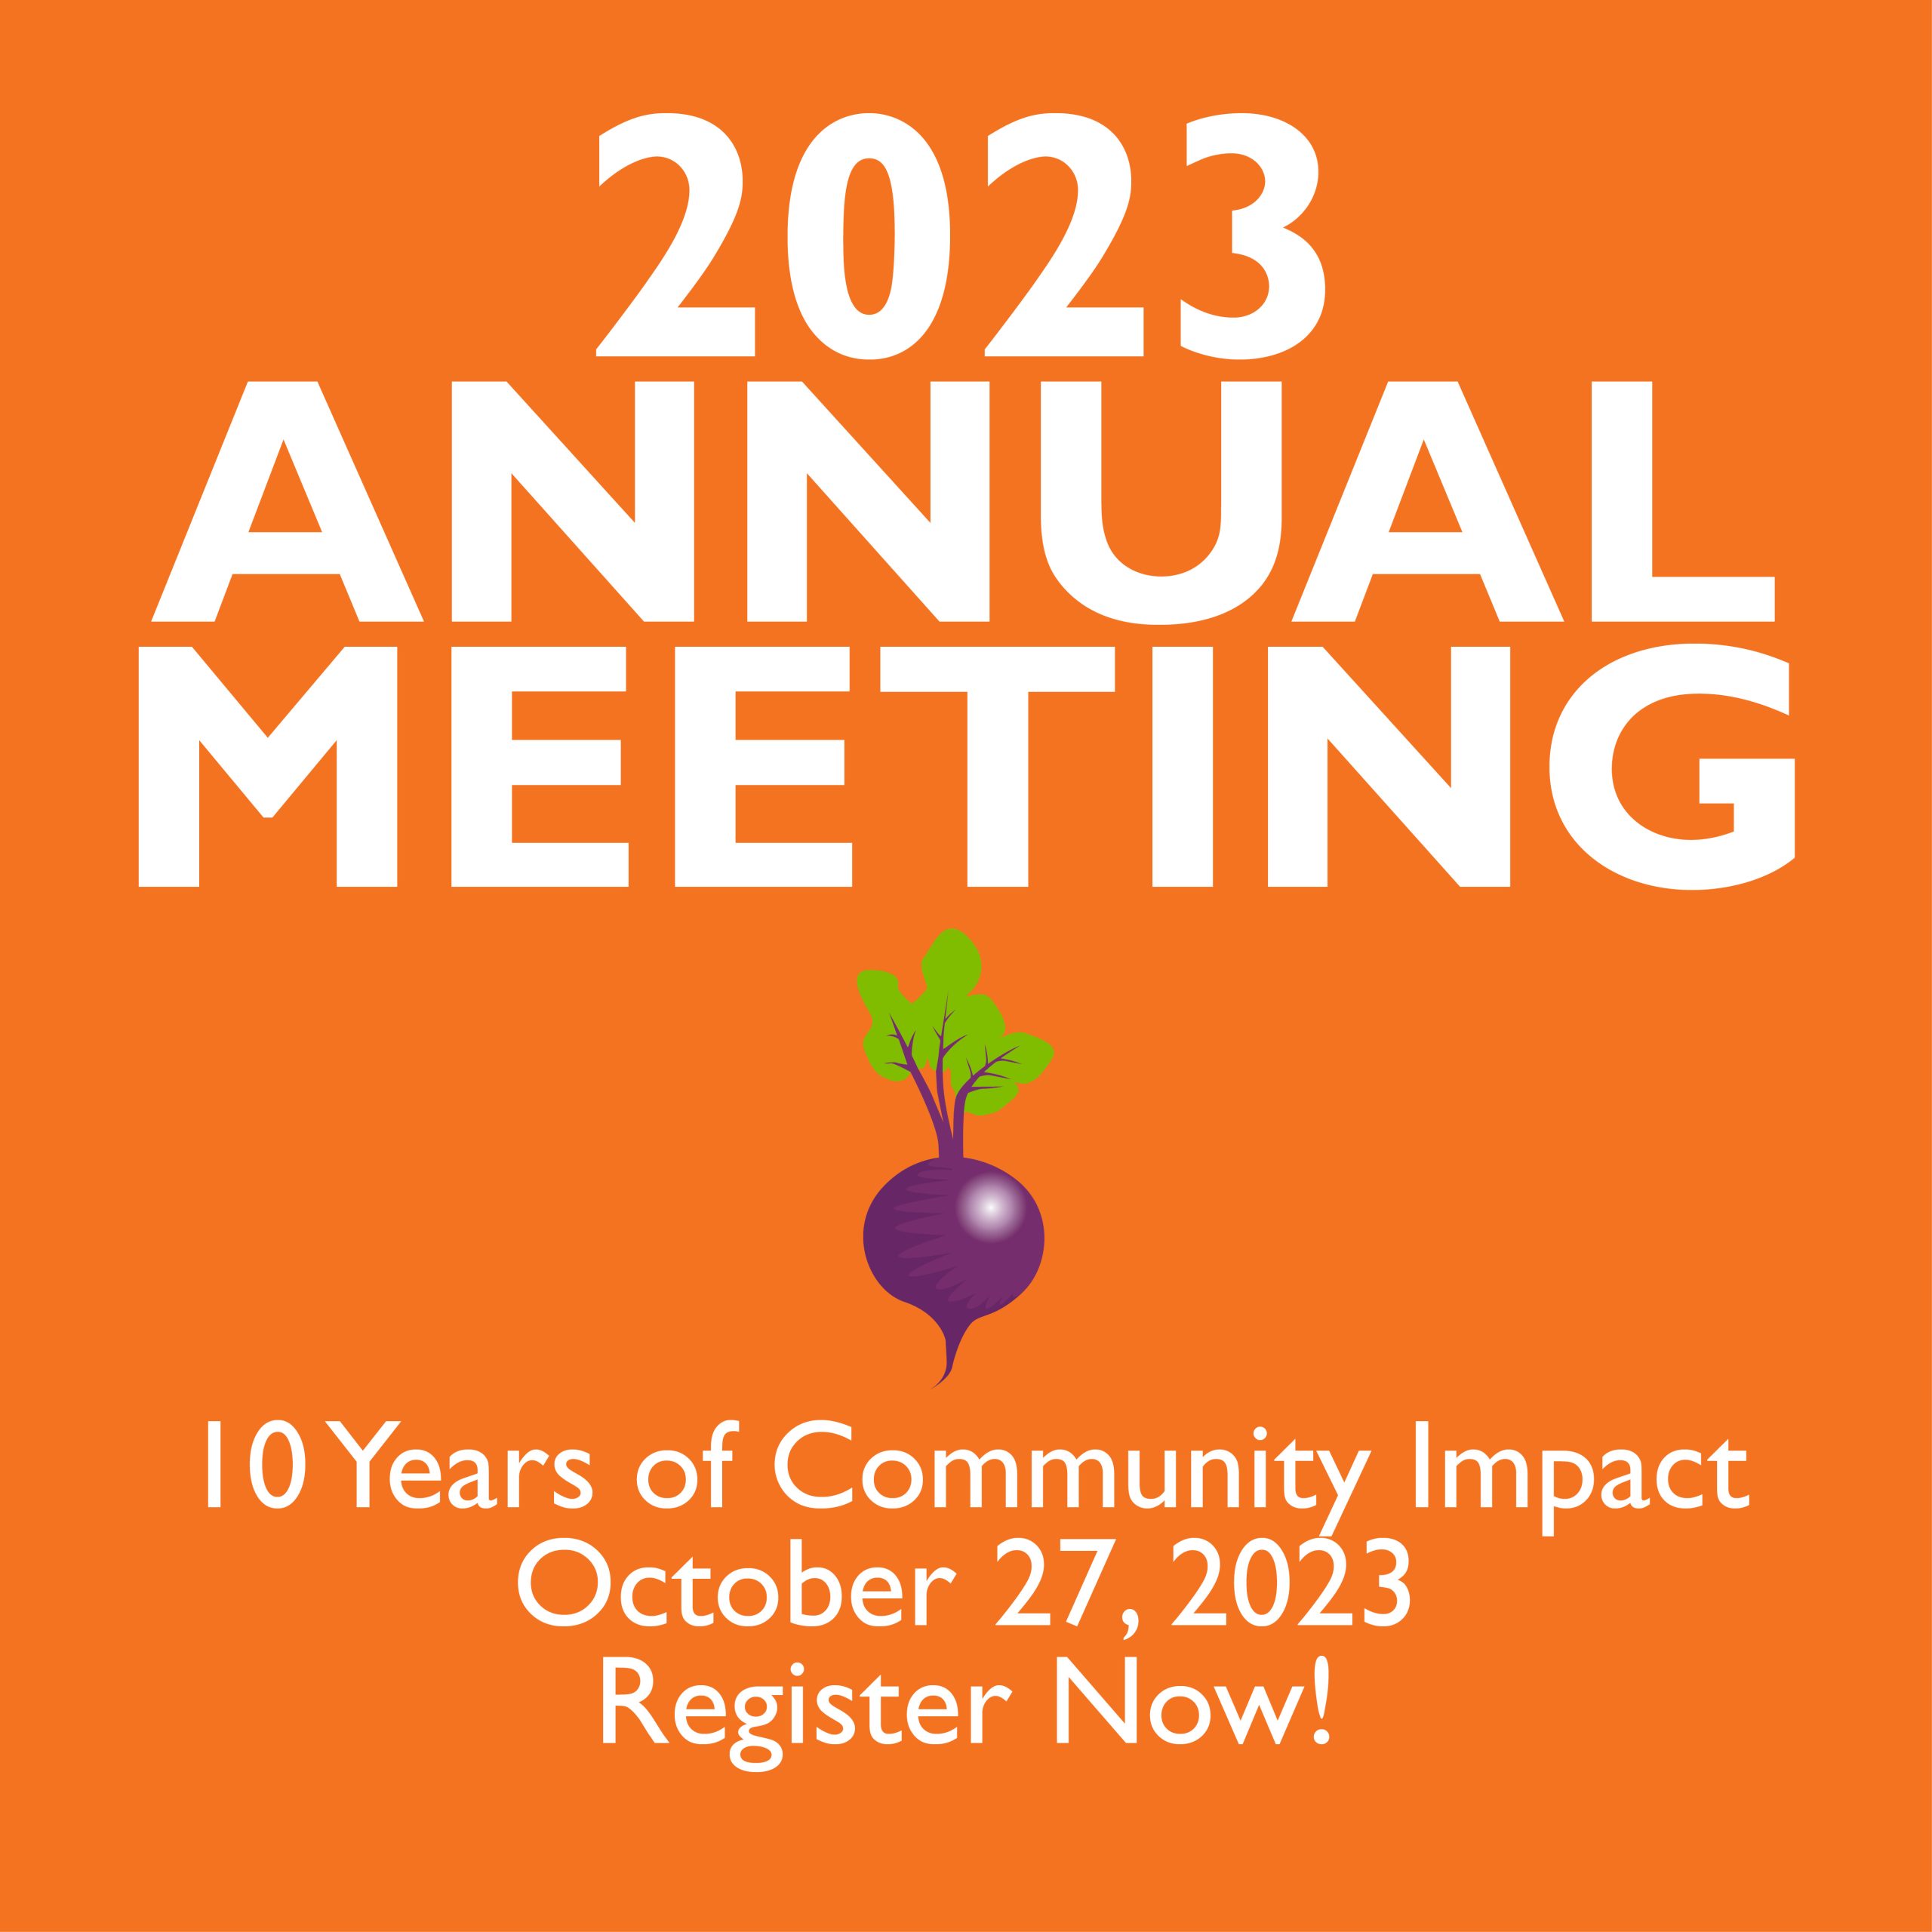 Register now for Impact 2023